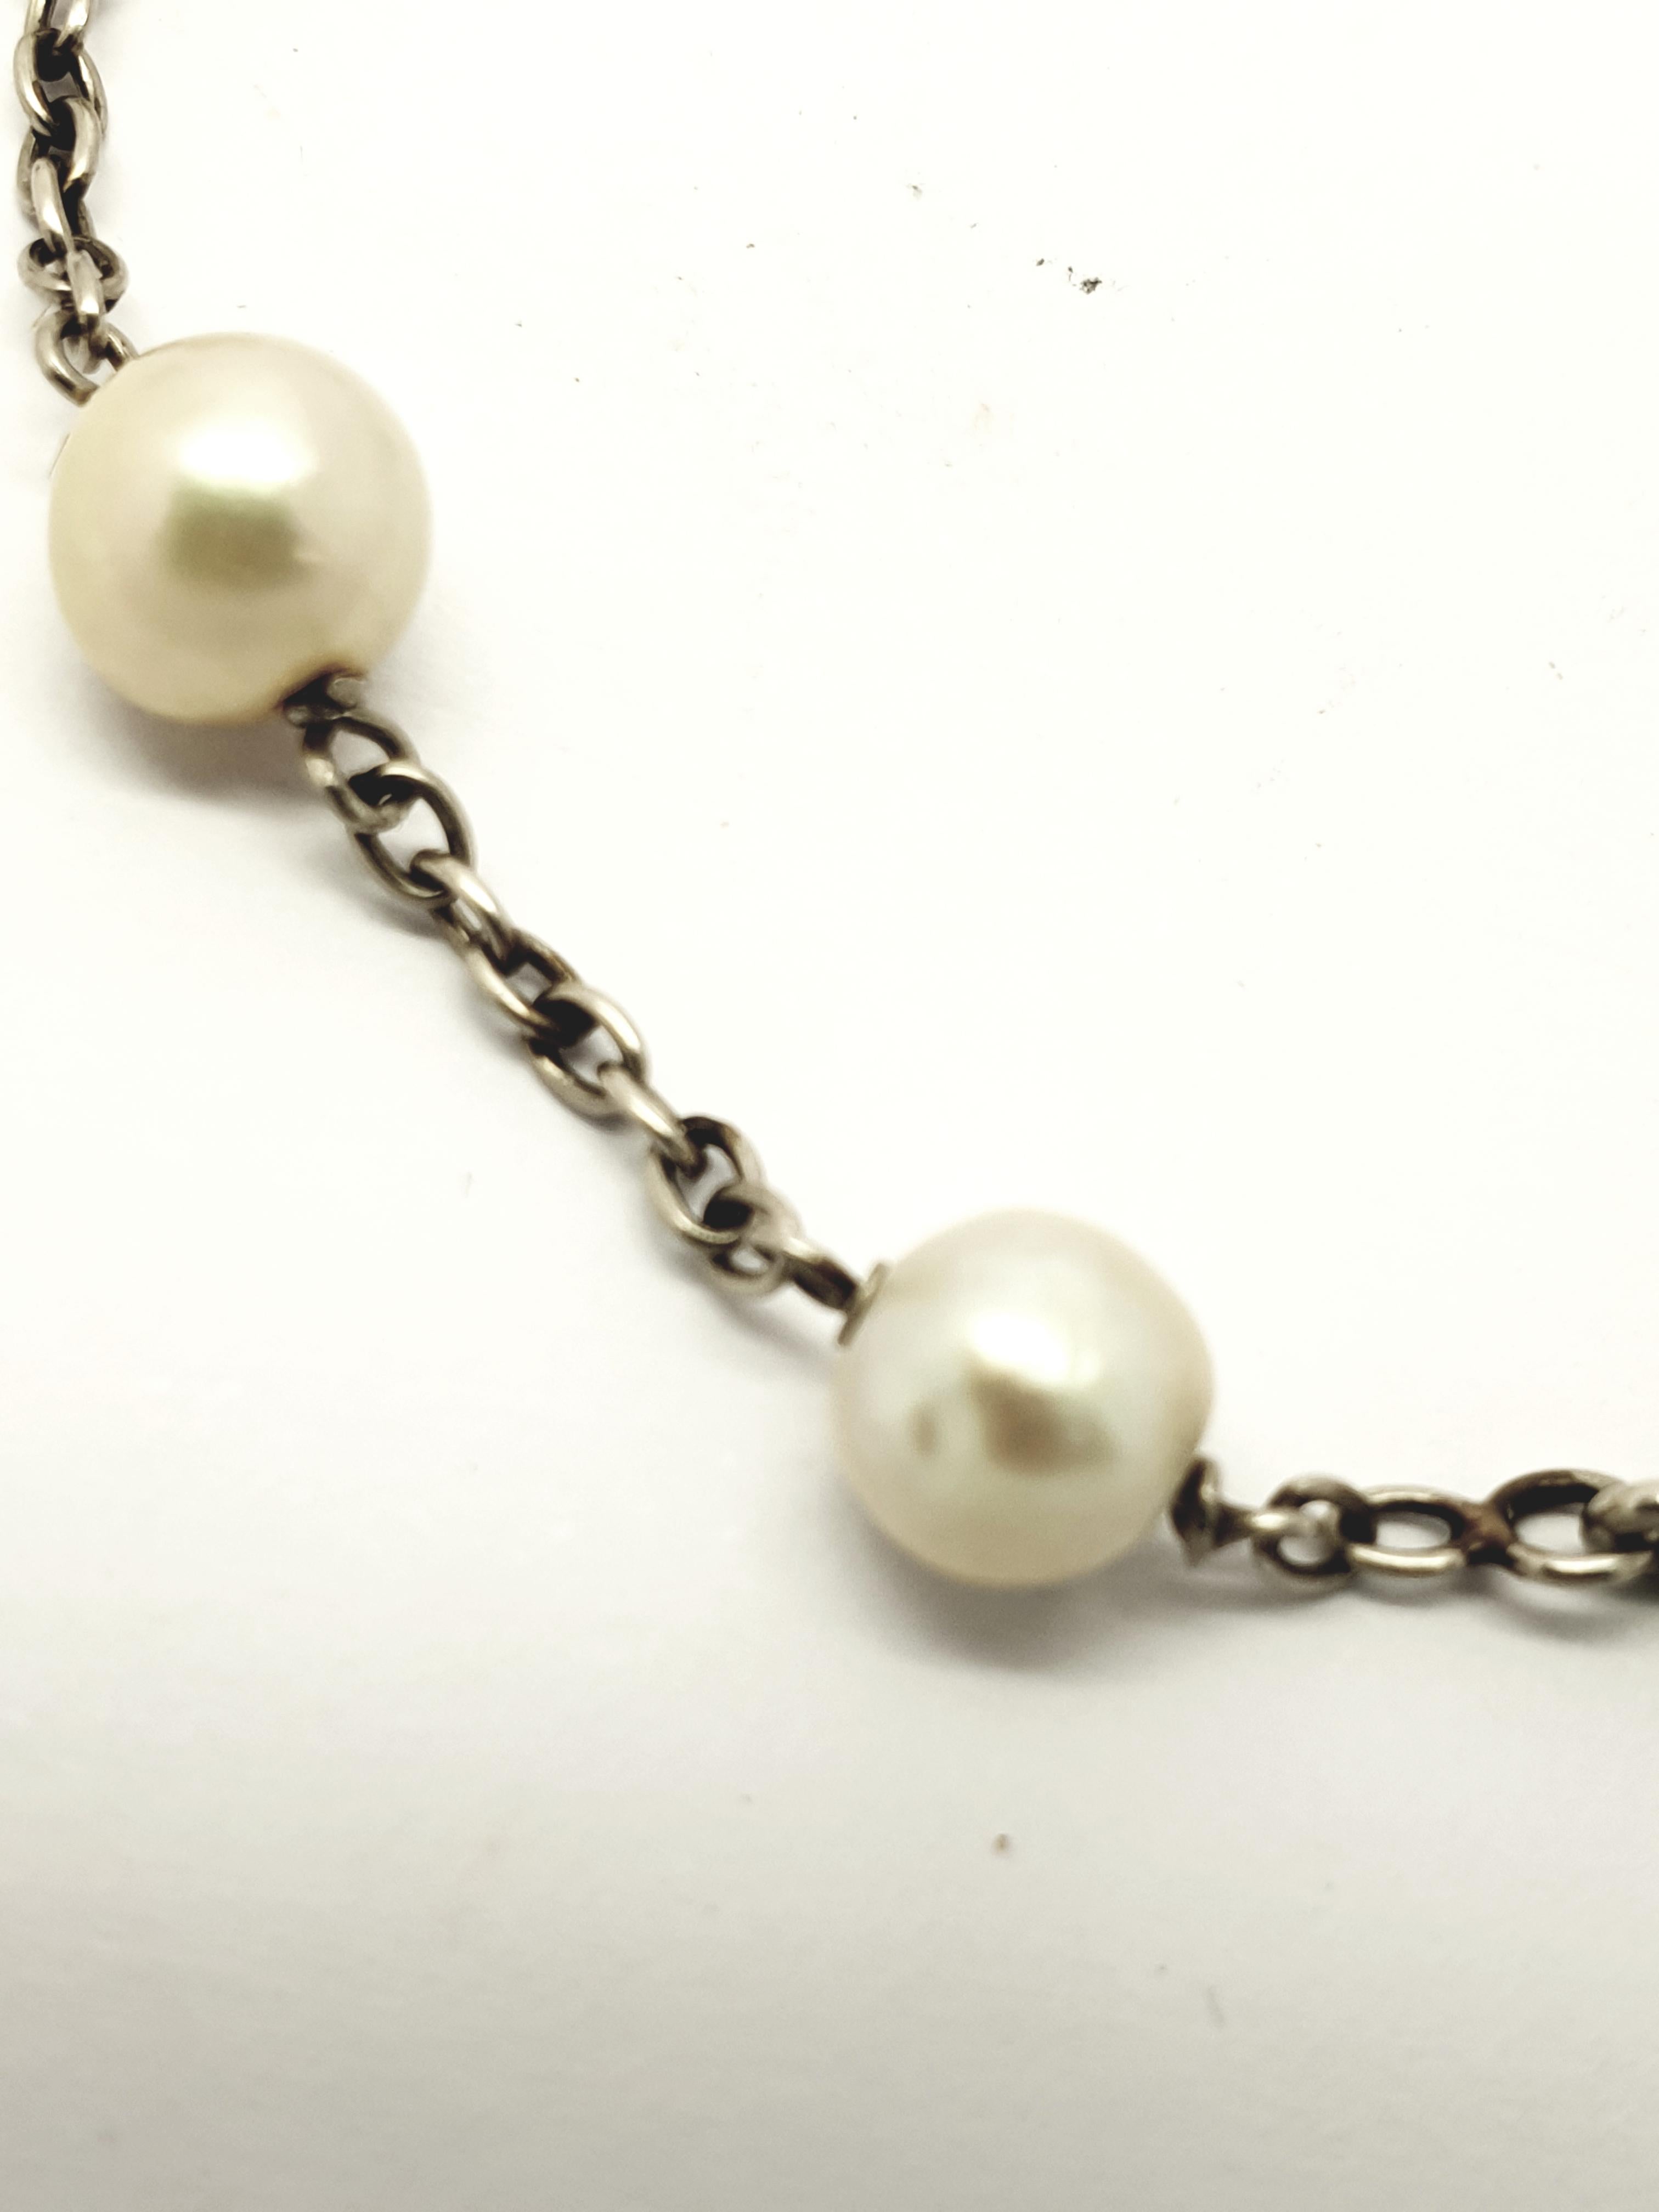 Art Deco 1930's  platinum natural pearl bracelet. Weighs approximately  5.3 grams. French origin hallmarked dog head on clasp.The bracelet is chain style has 9  pearls.The pearls diameter: 4 mm-5 mm. Length: 7 and half inches long. 